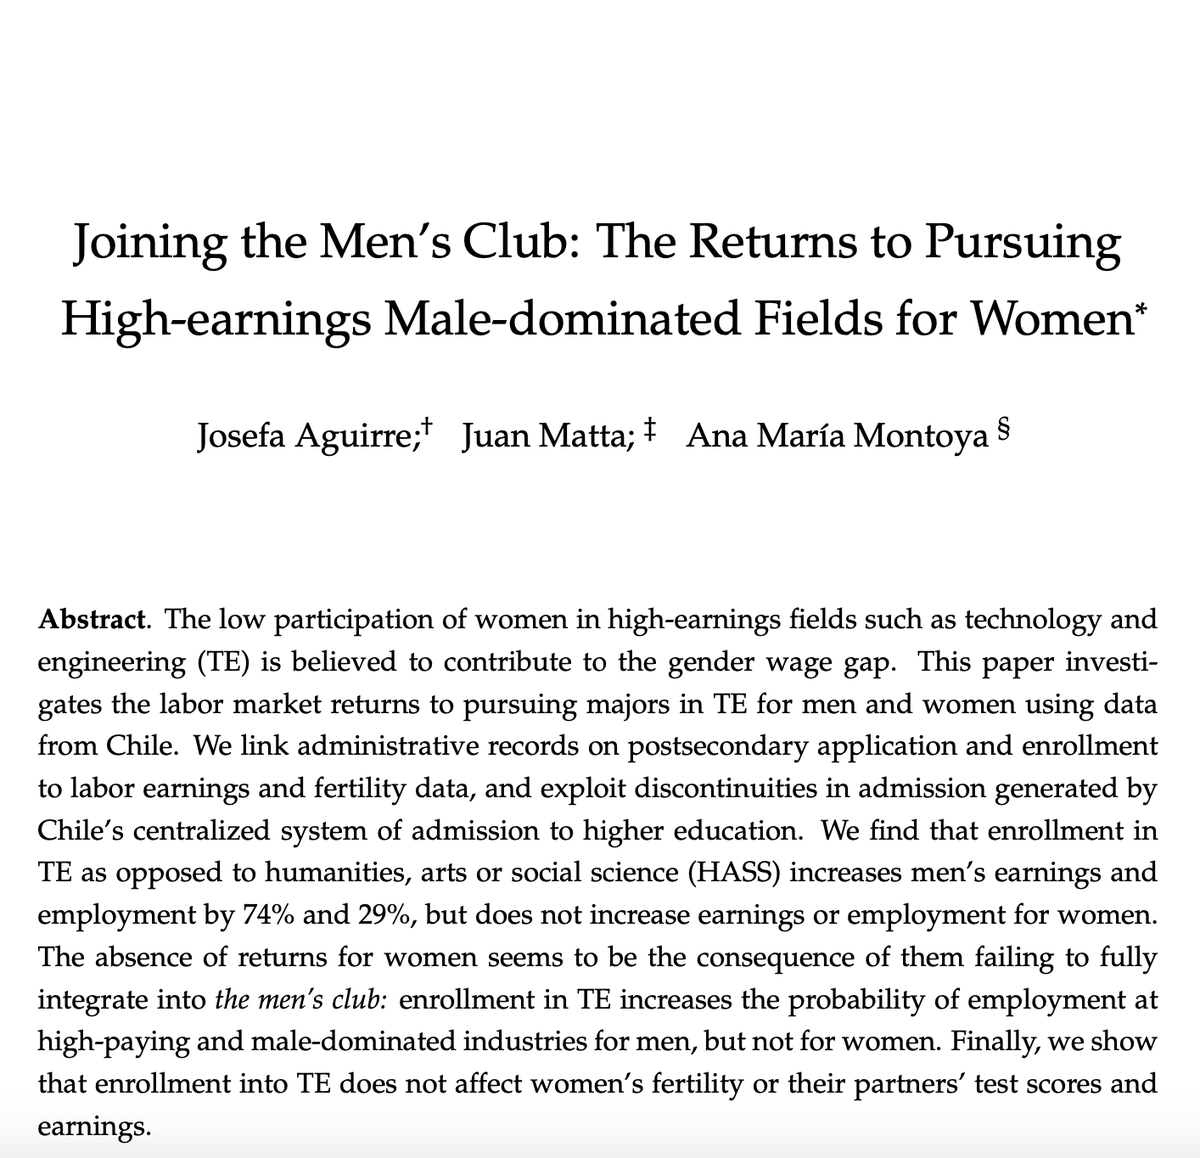 Excited to be presenting our joint paper with @jjmatta and Ana María Montoya on gender differences in the returns to pursuing a degree in technology and engineering tomorrow at 4:50 at the #NBERSI. Thread